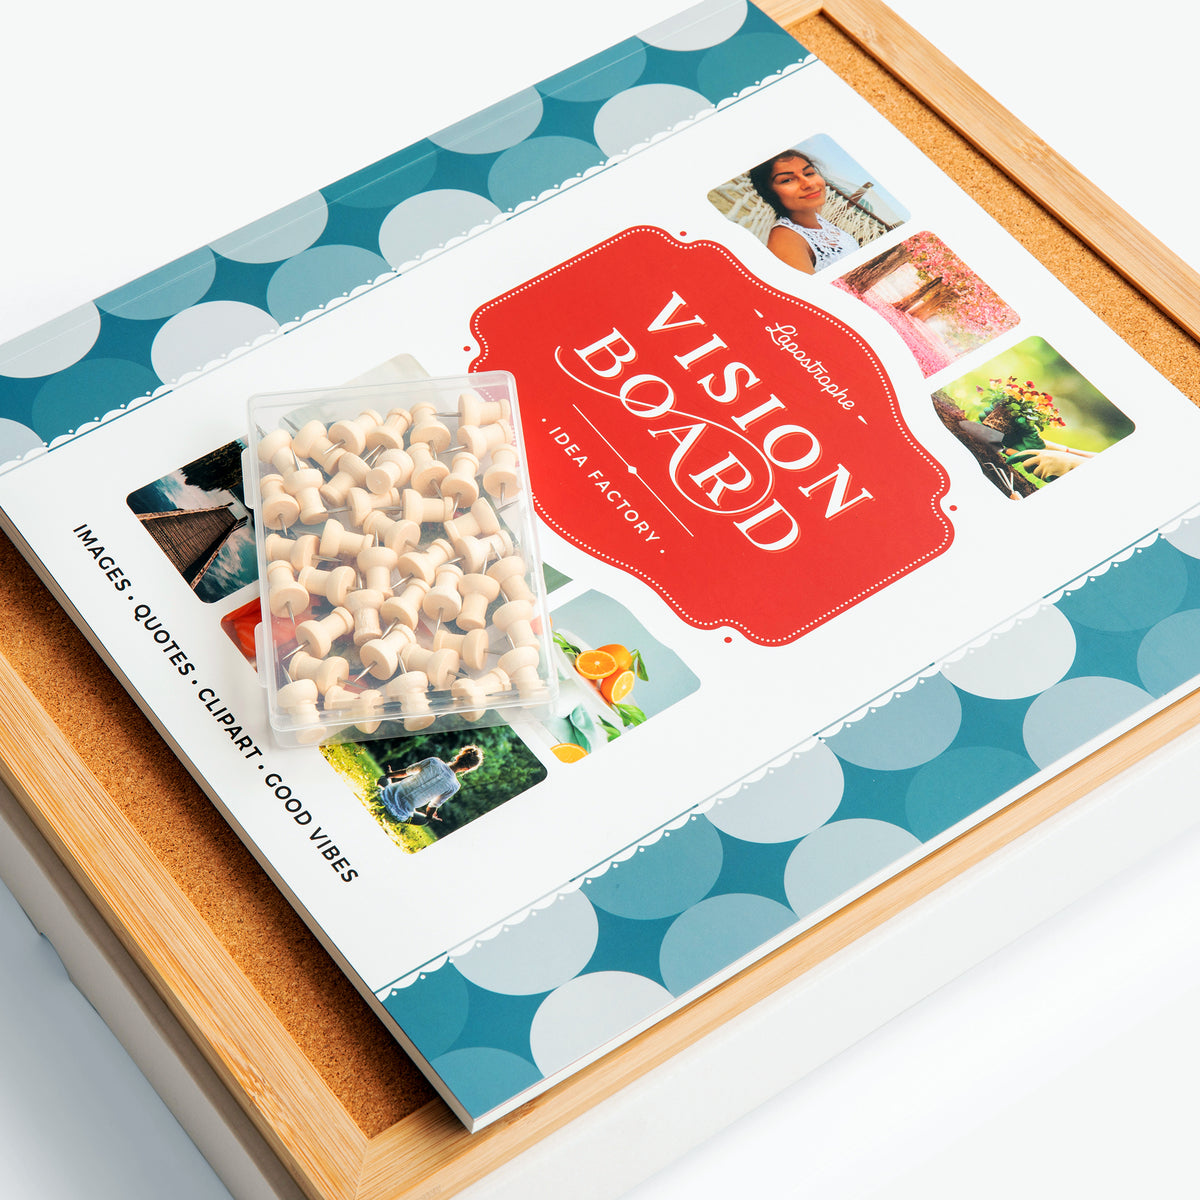 Vision Board Kit Printable Graphic by VD Designs · Creative Fabrica